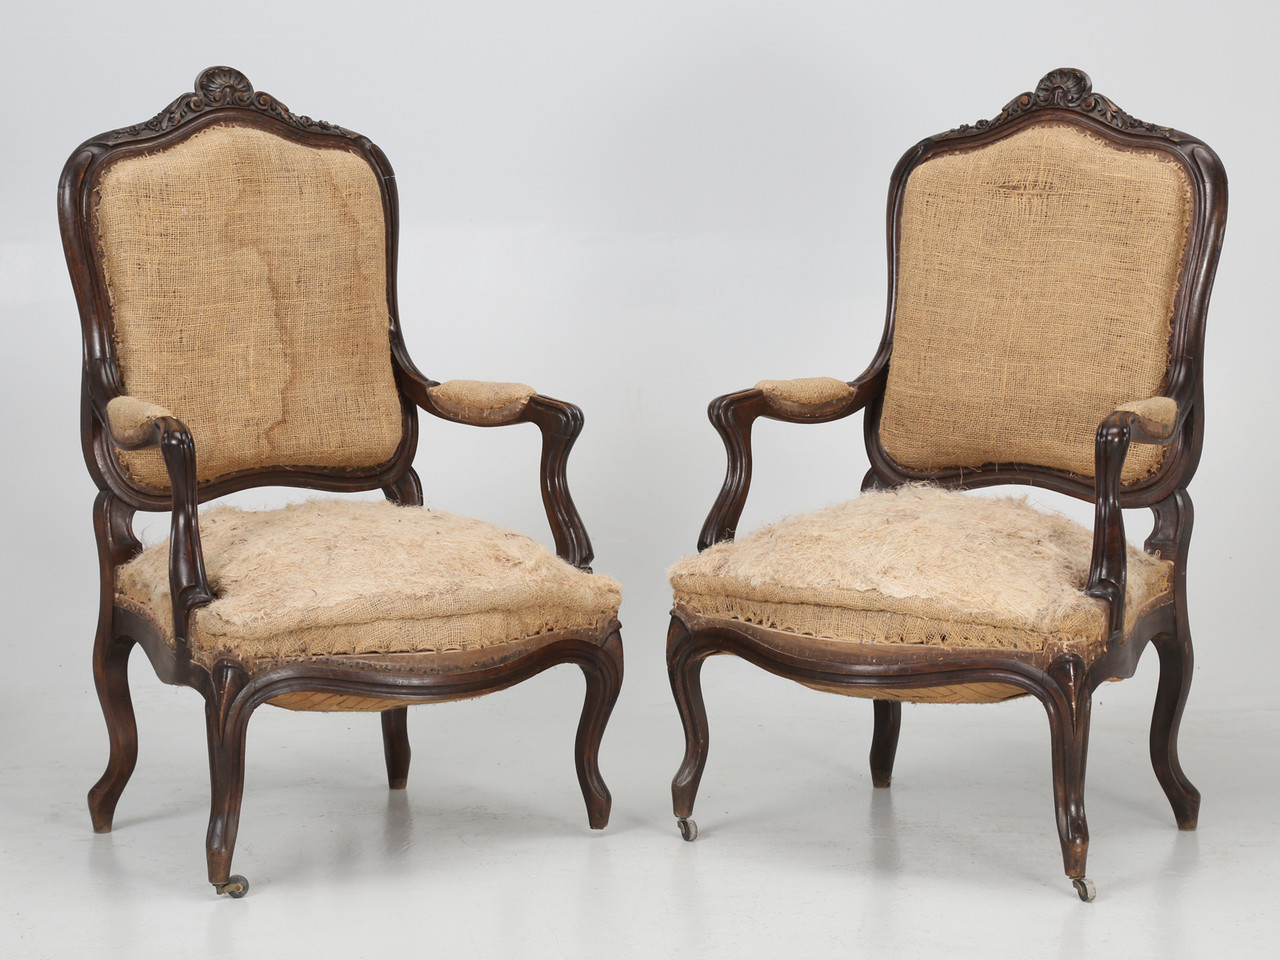 Antique French Walnut Hand Carved Armchair or Throne Chair Unrestored  Condition